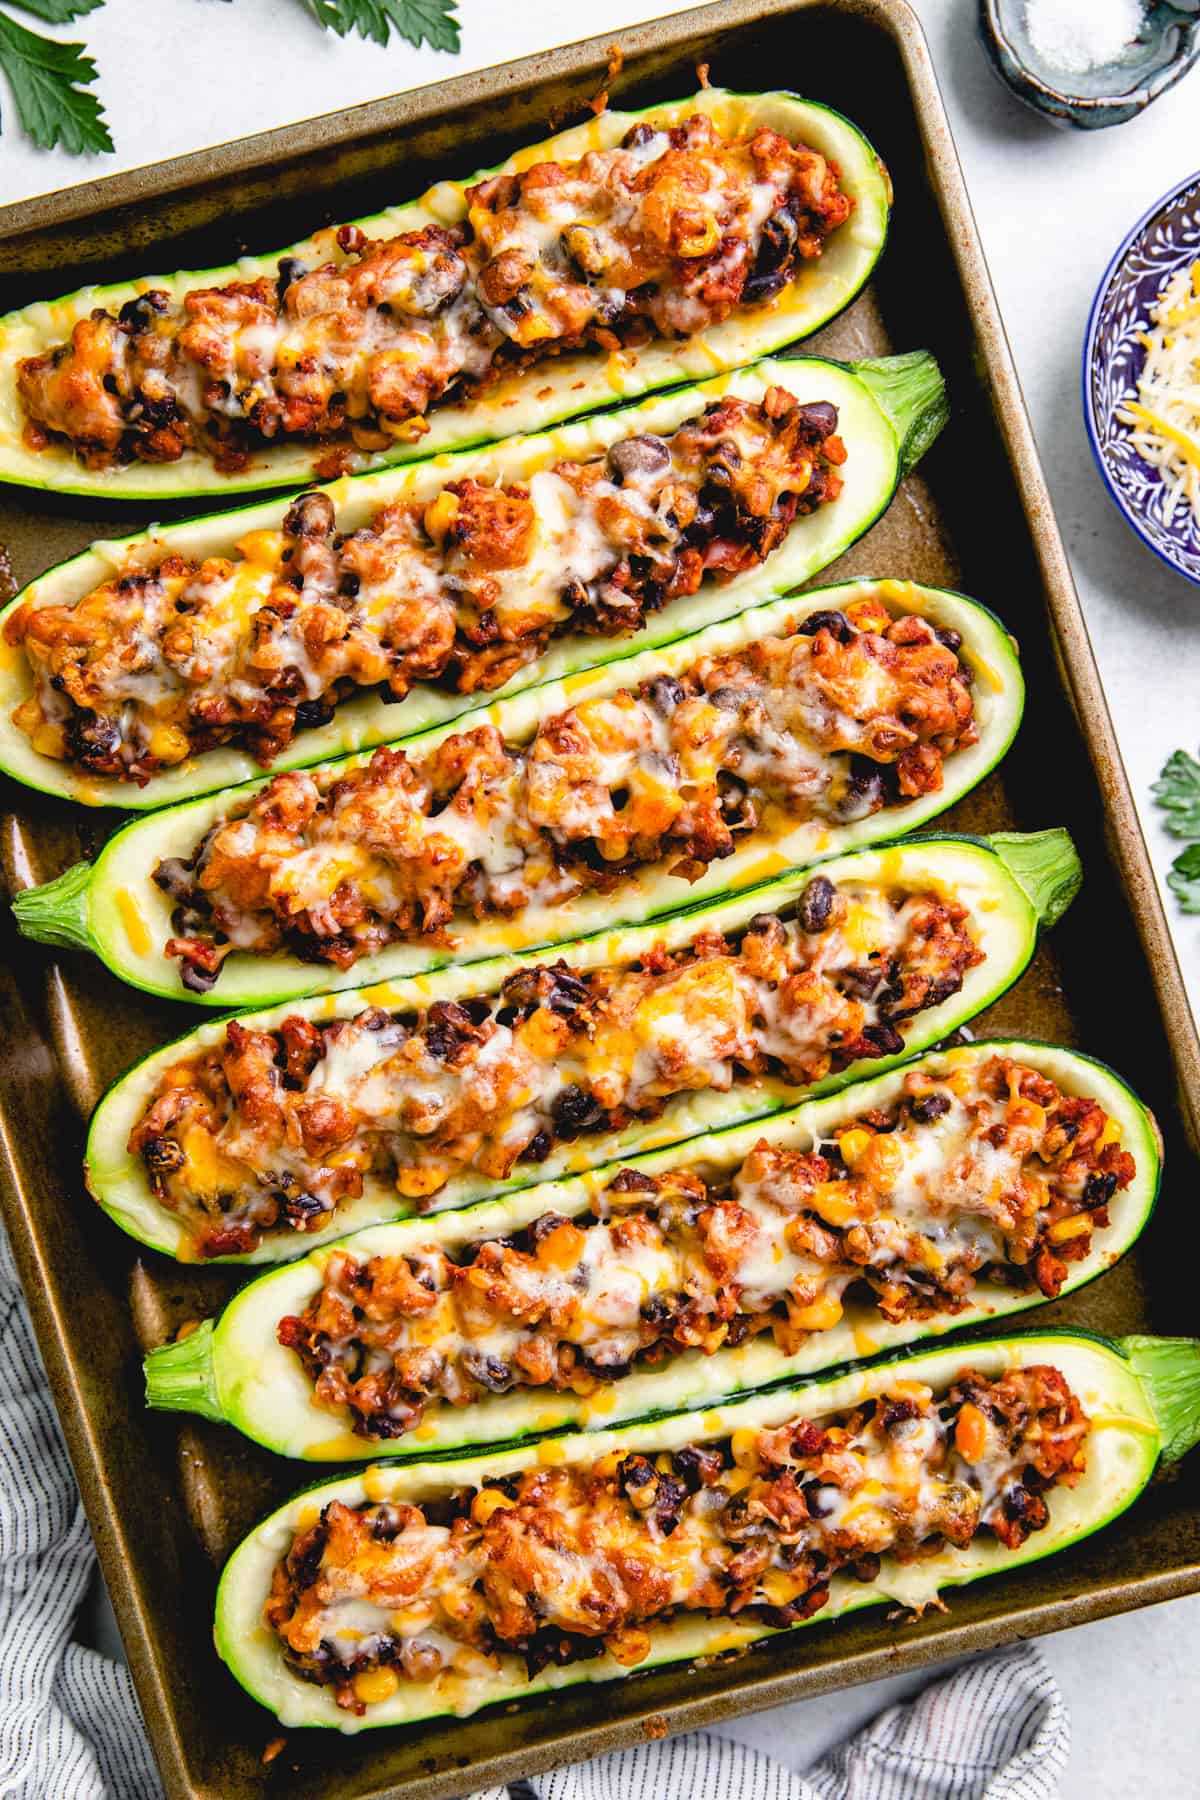 Zucchini boats, stuffed with ground turkey, black beans, and corn, topped with melted cheese on a baking sheet.